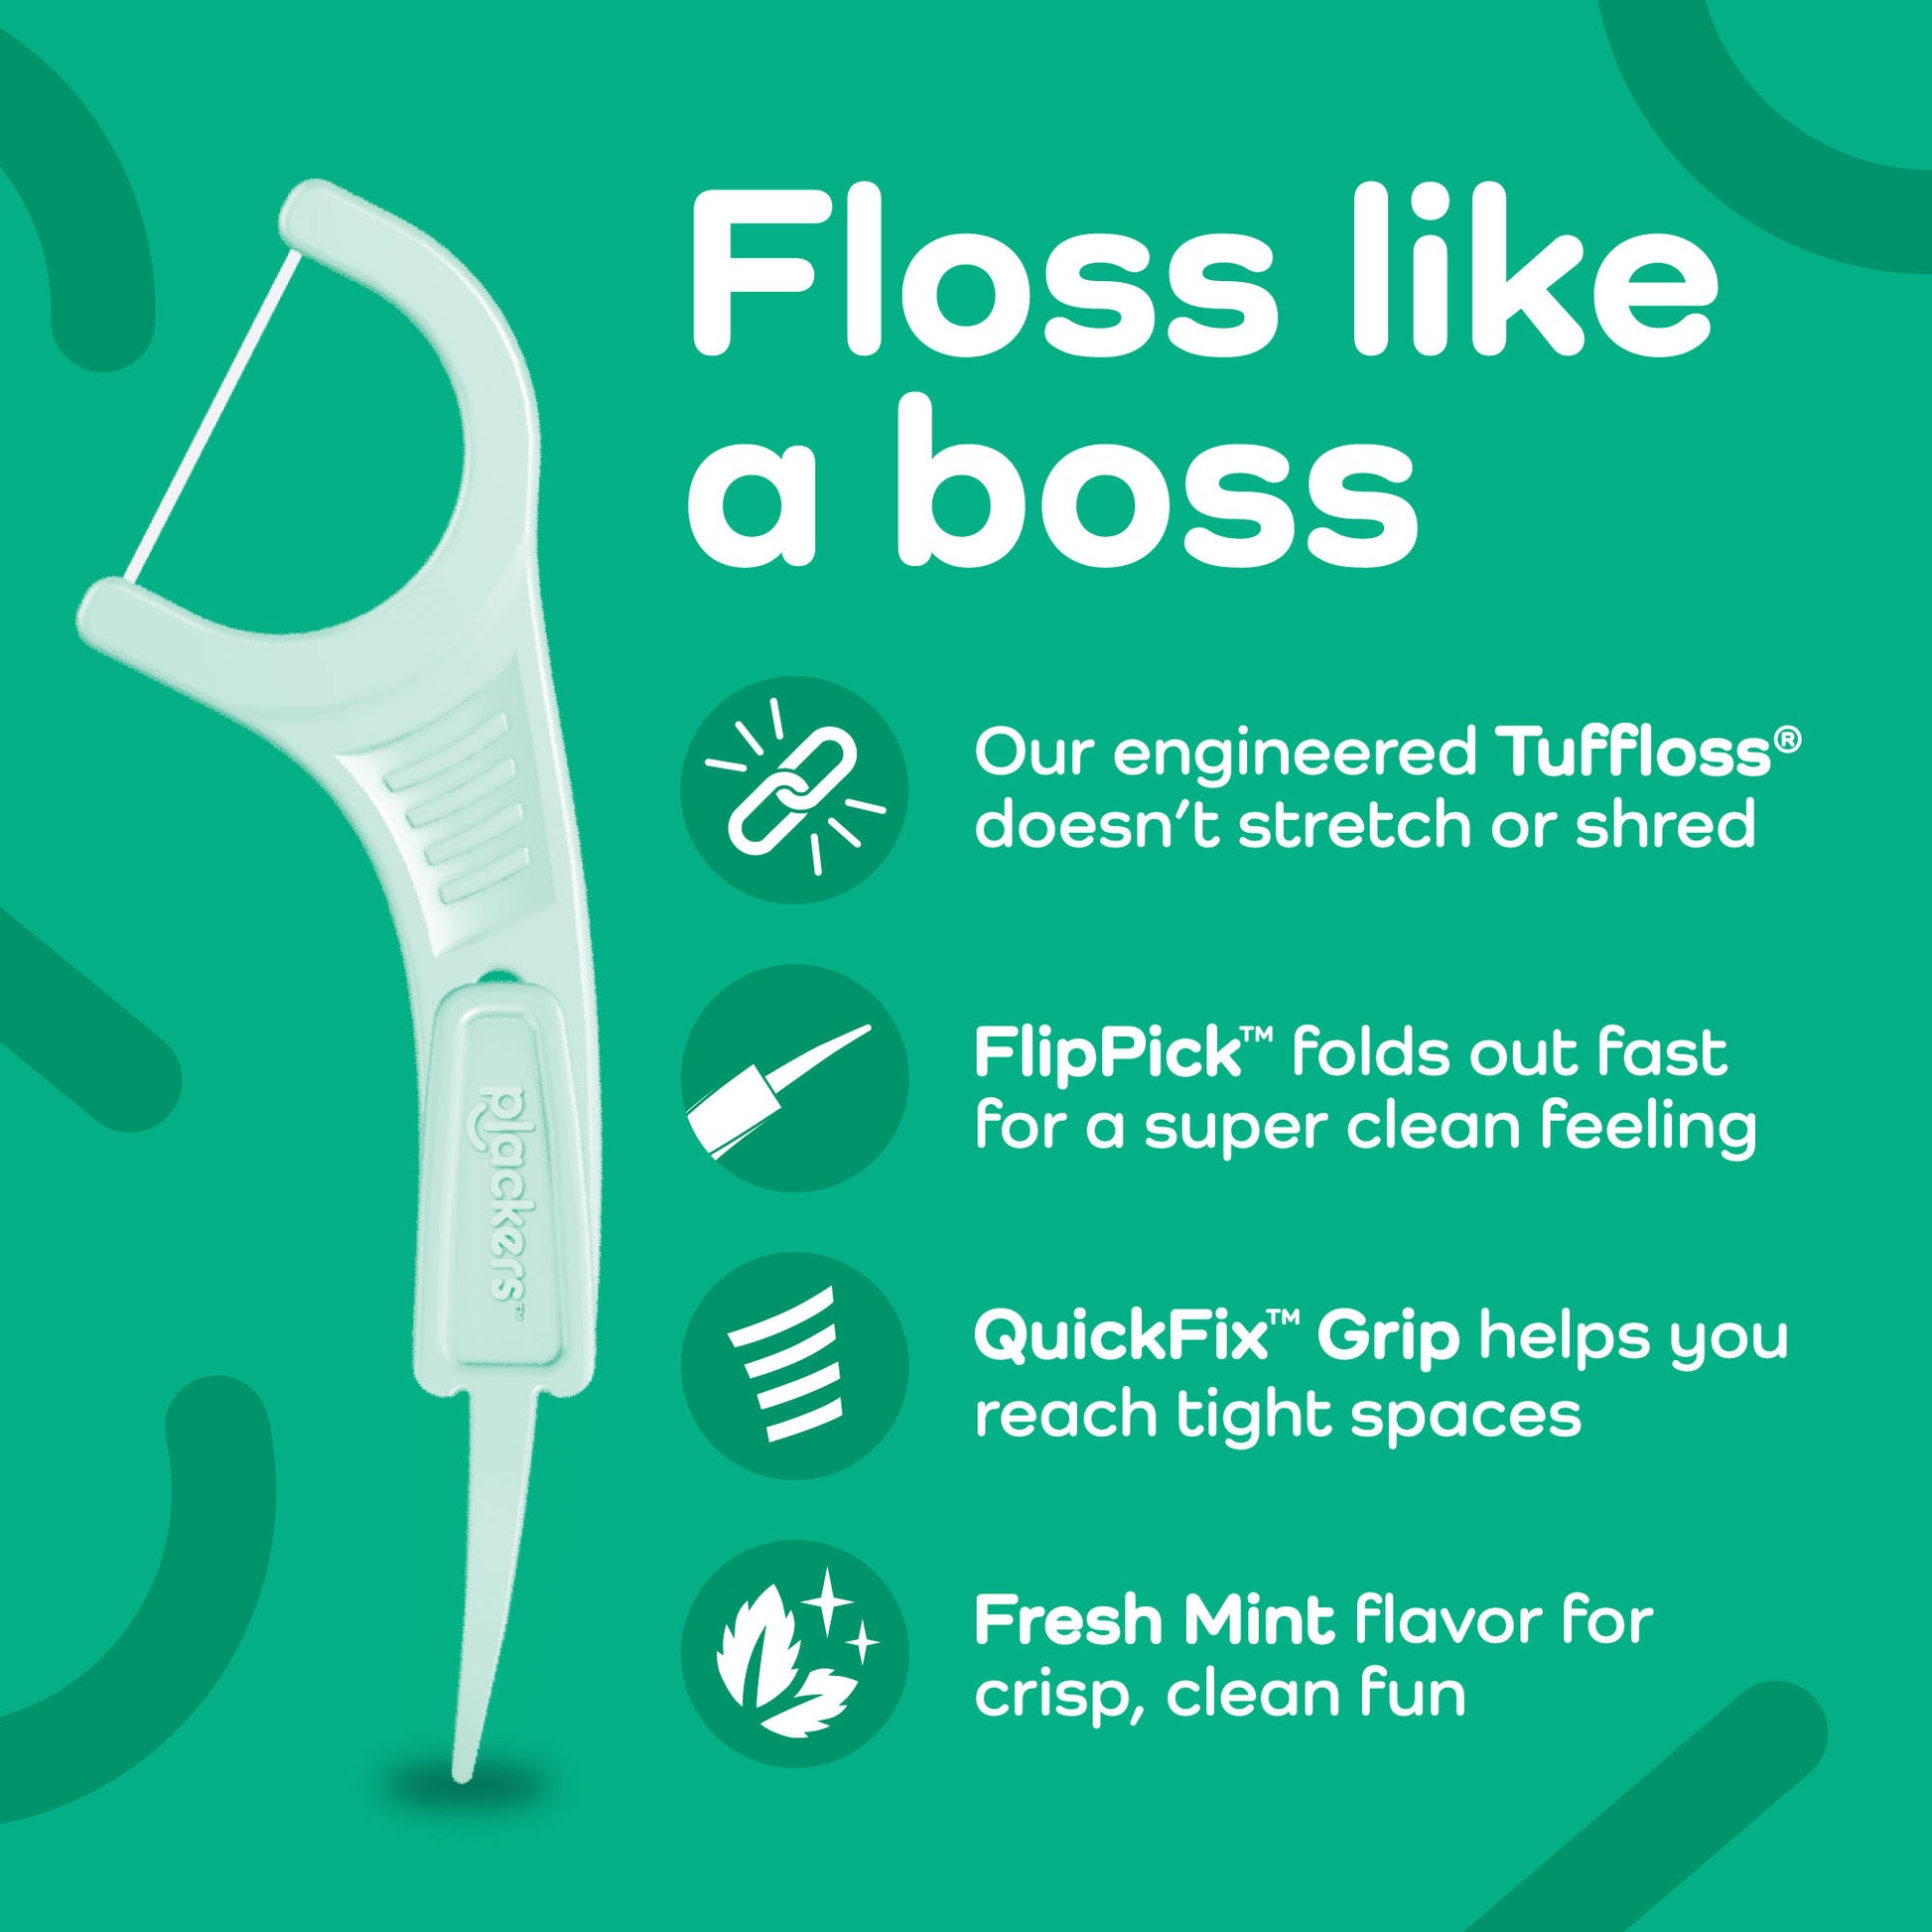 Floss like a boss. Our engineered Tuffloss doesn't stretch or shred. FlipPick folds out fast for a super clean feeling. QuickFix Grip helps you reach tight spaces. Fresh Mint flavor for crisp, clean fun